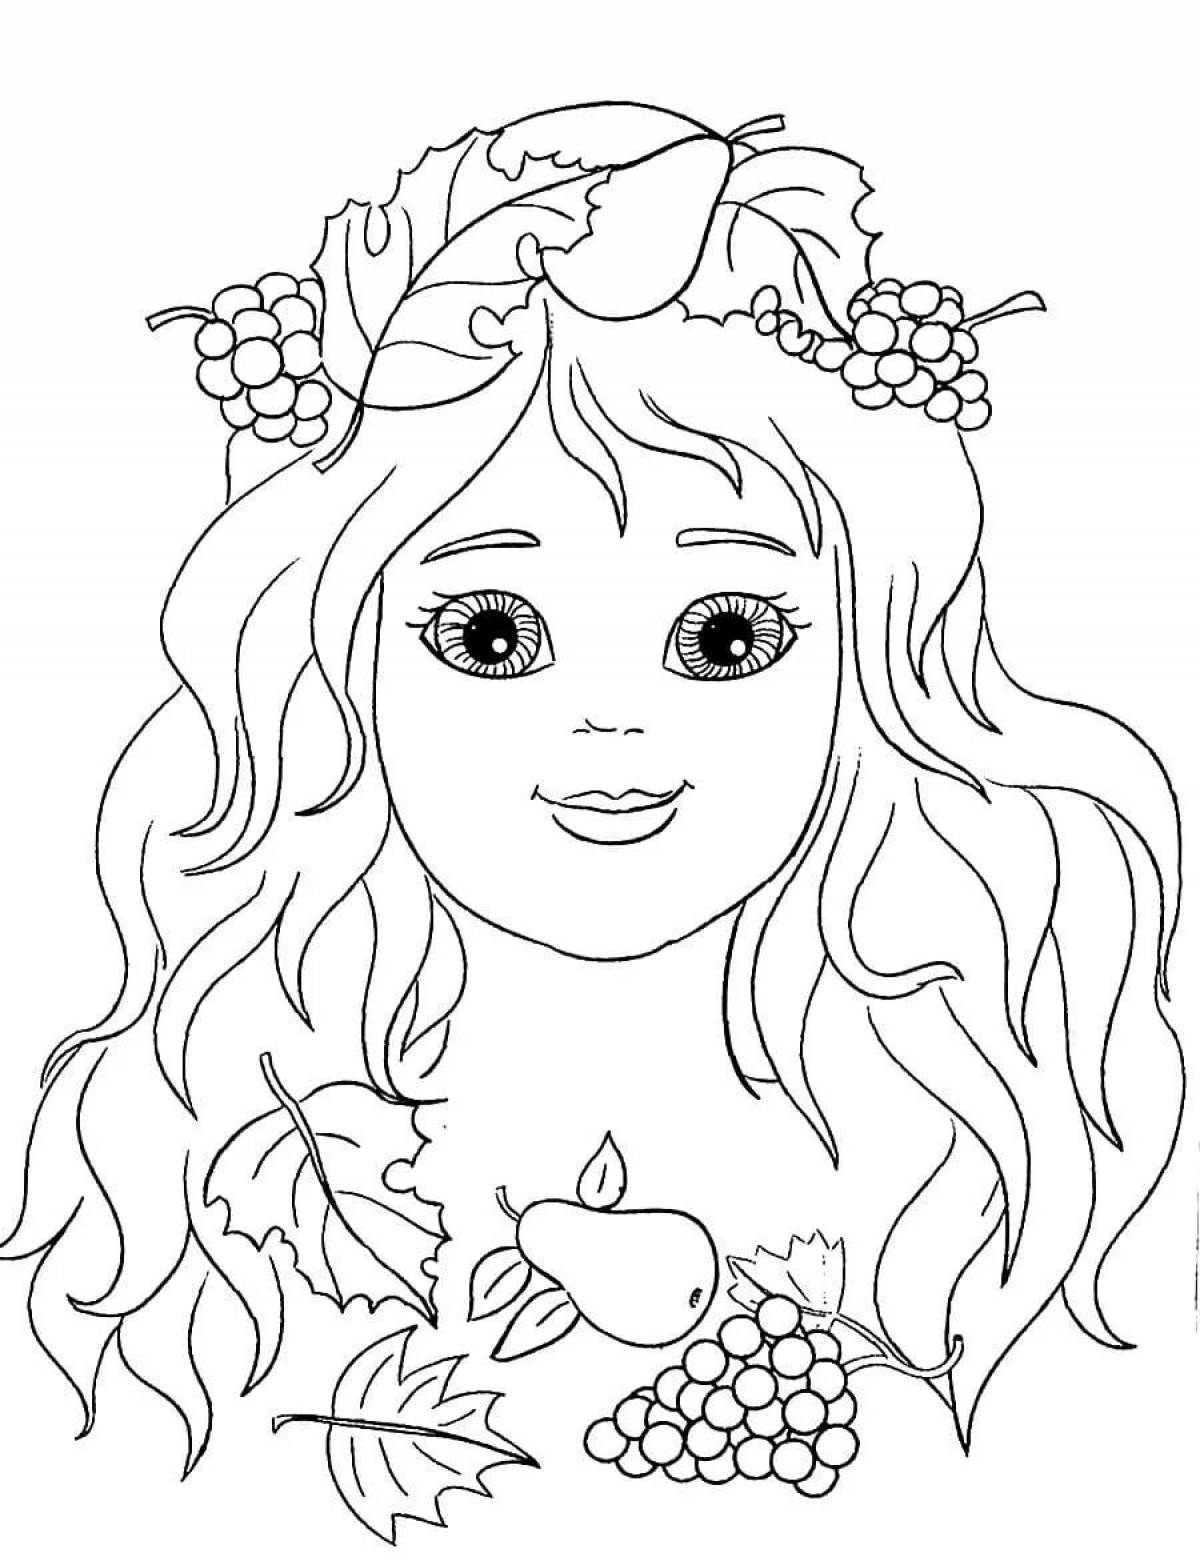 Sublime autumn girl coloring page